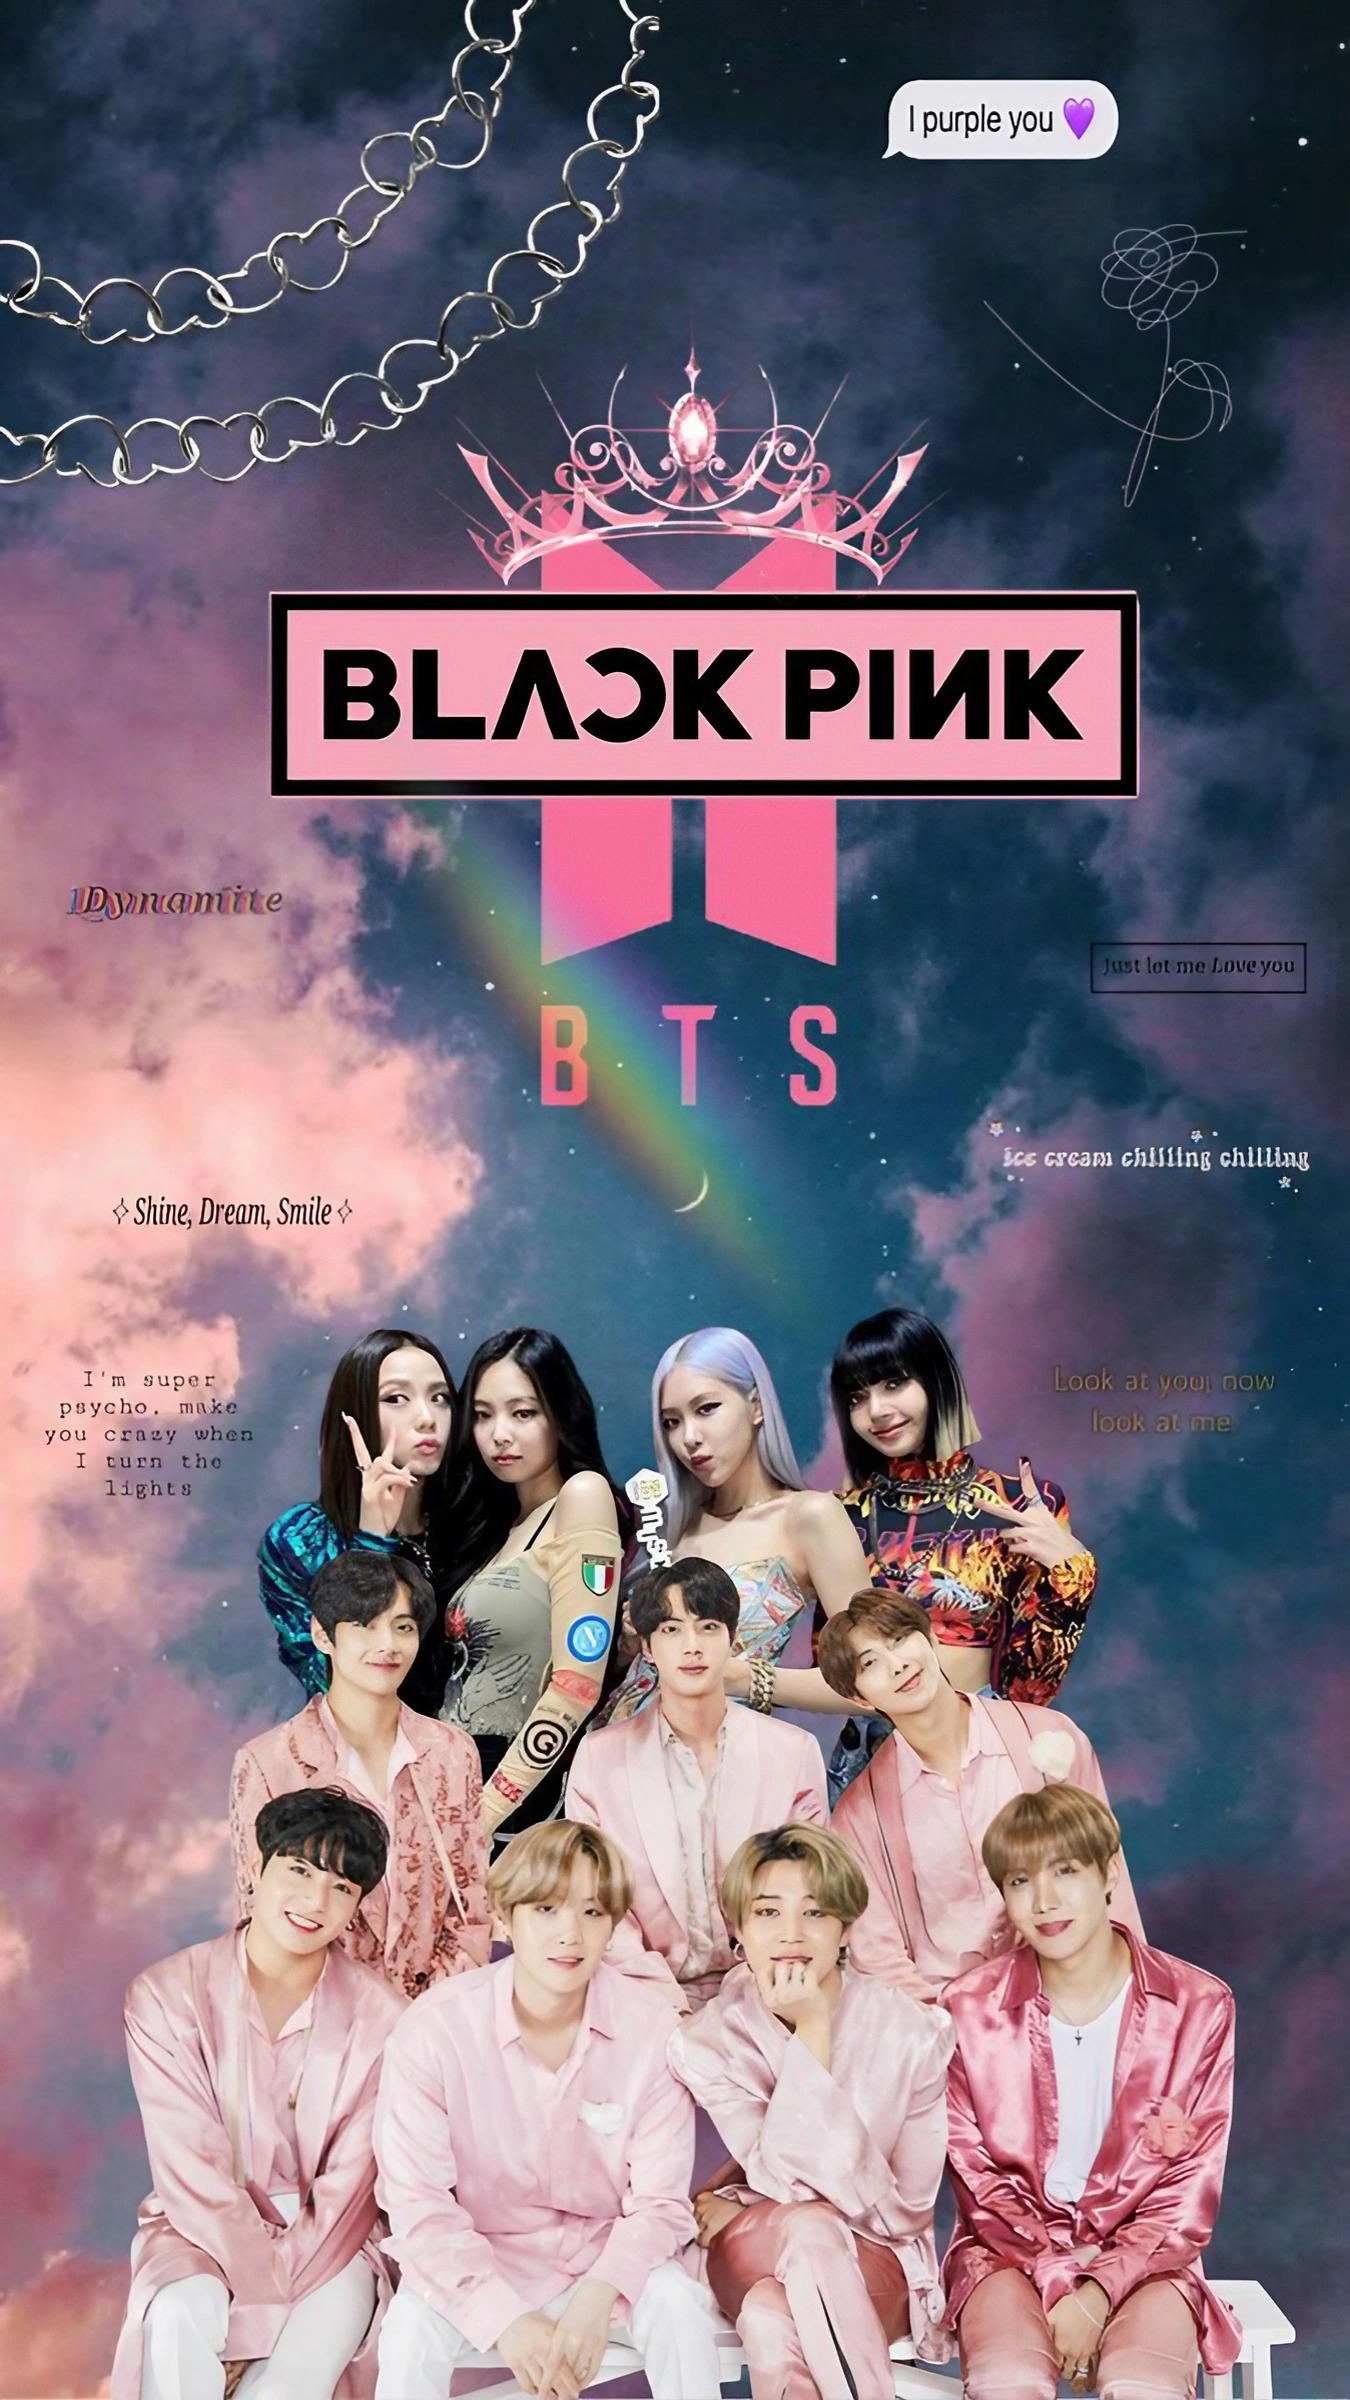 Bts And Blackpink Group